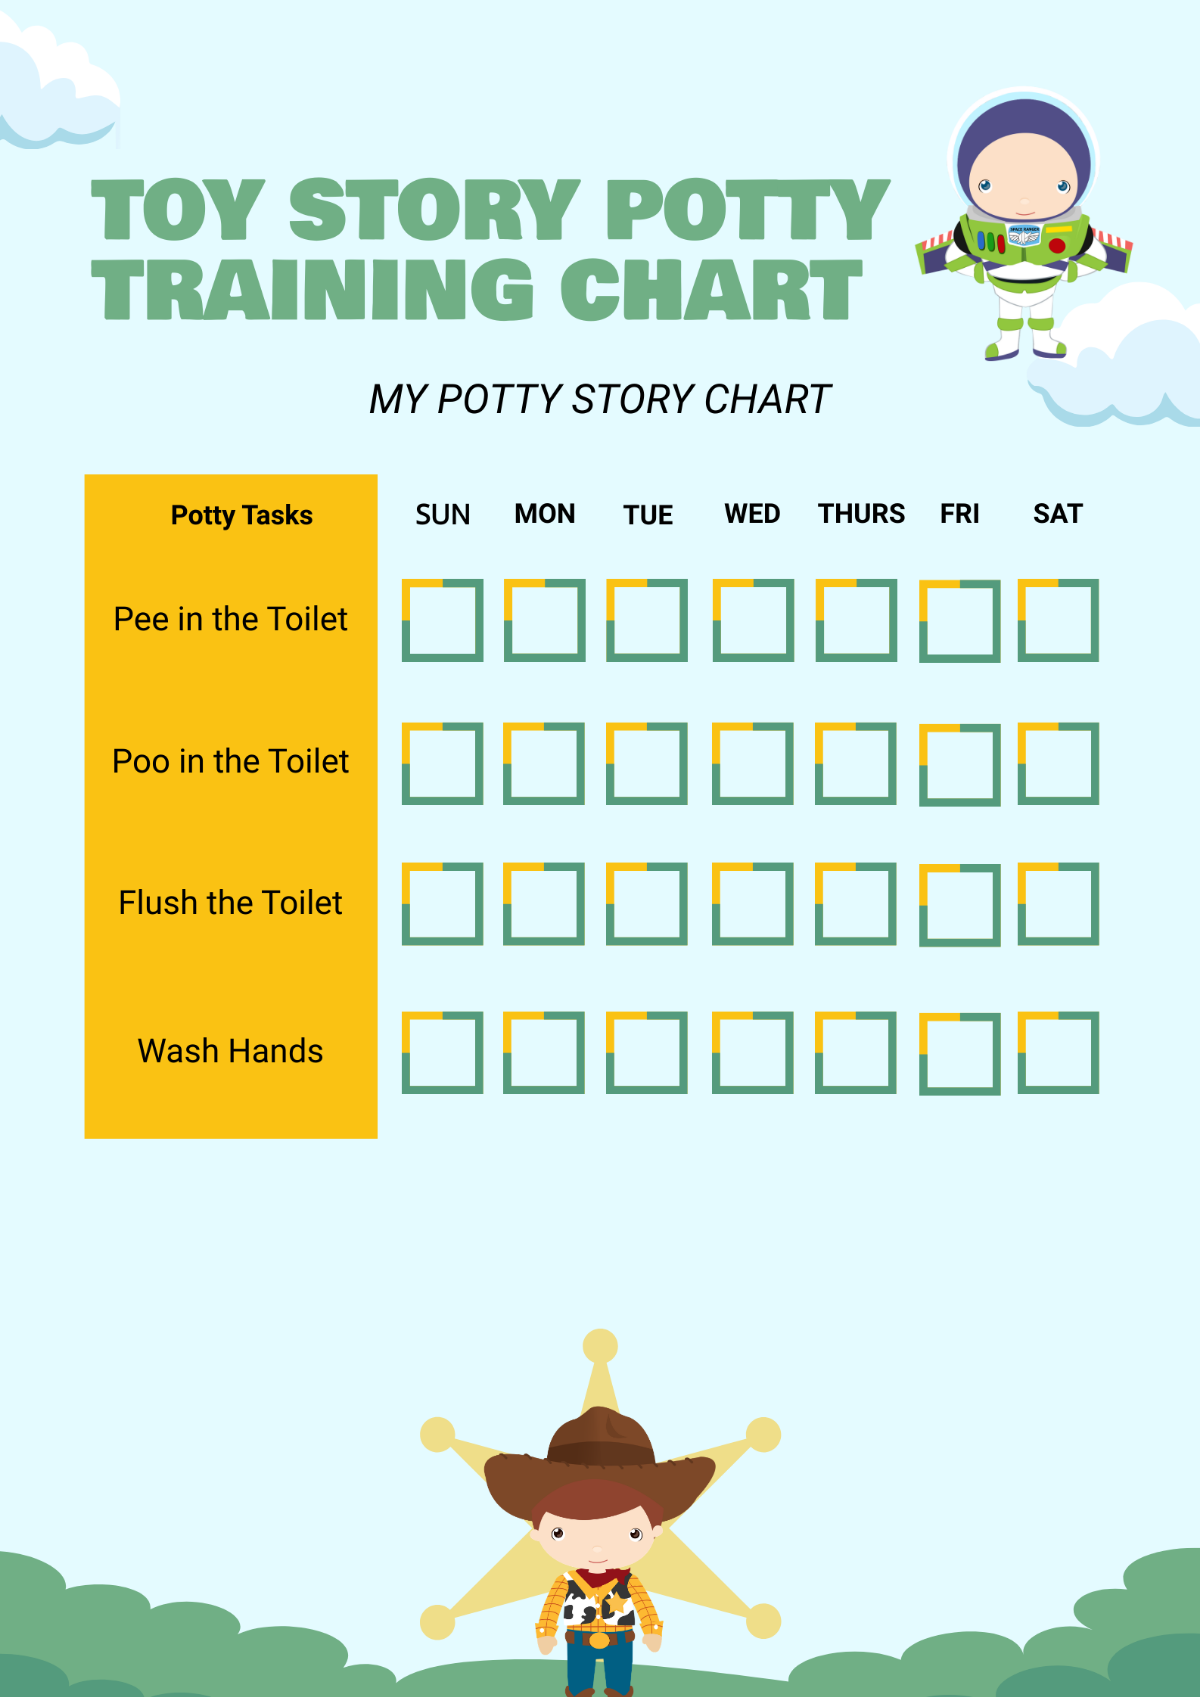 Free Toy Story Potty Training Chart Template